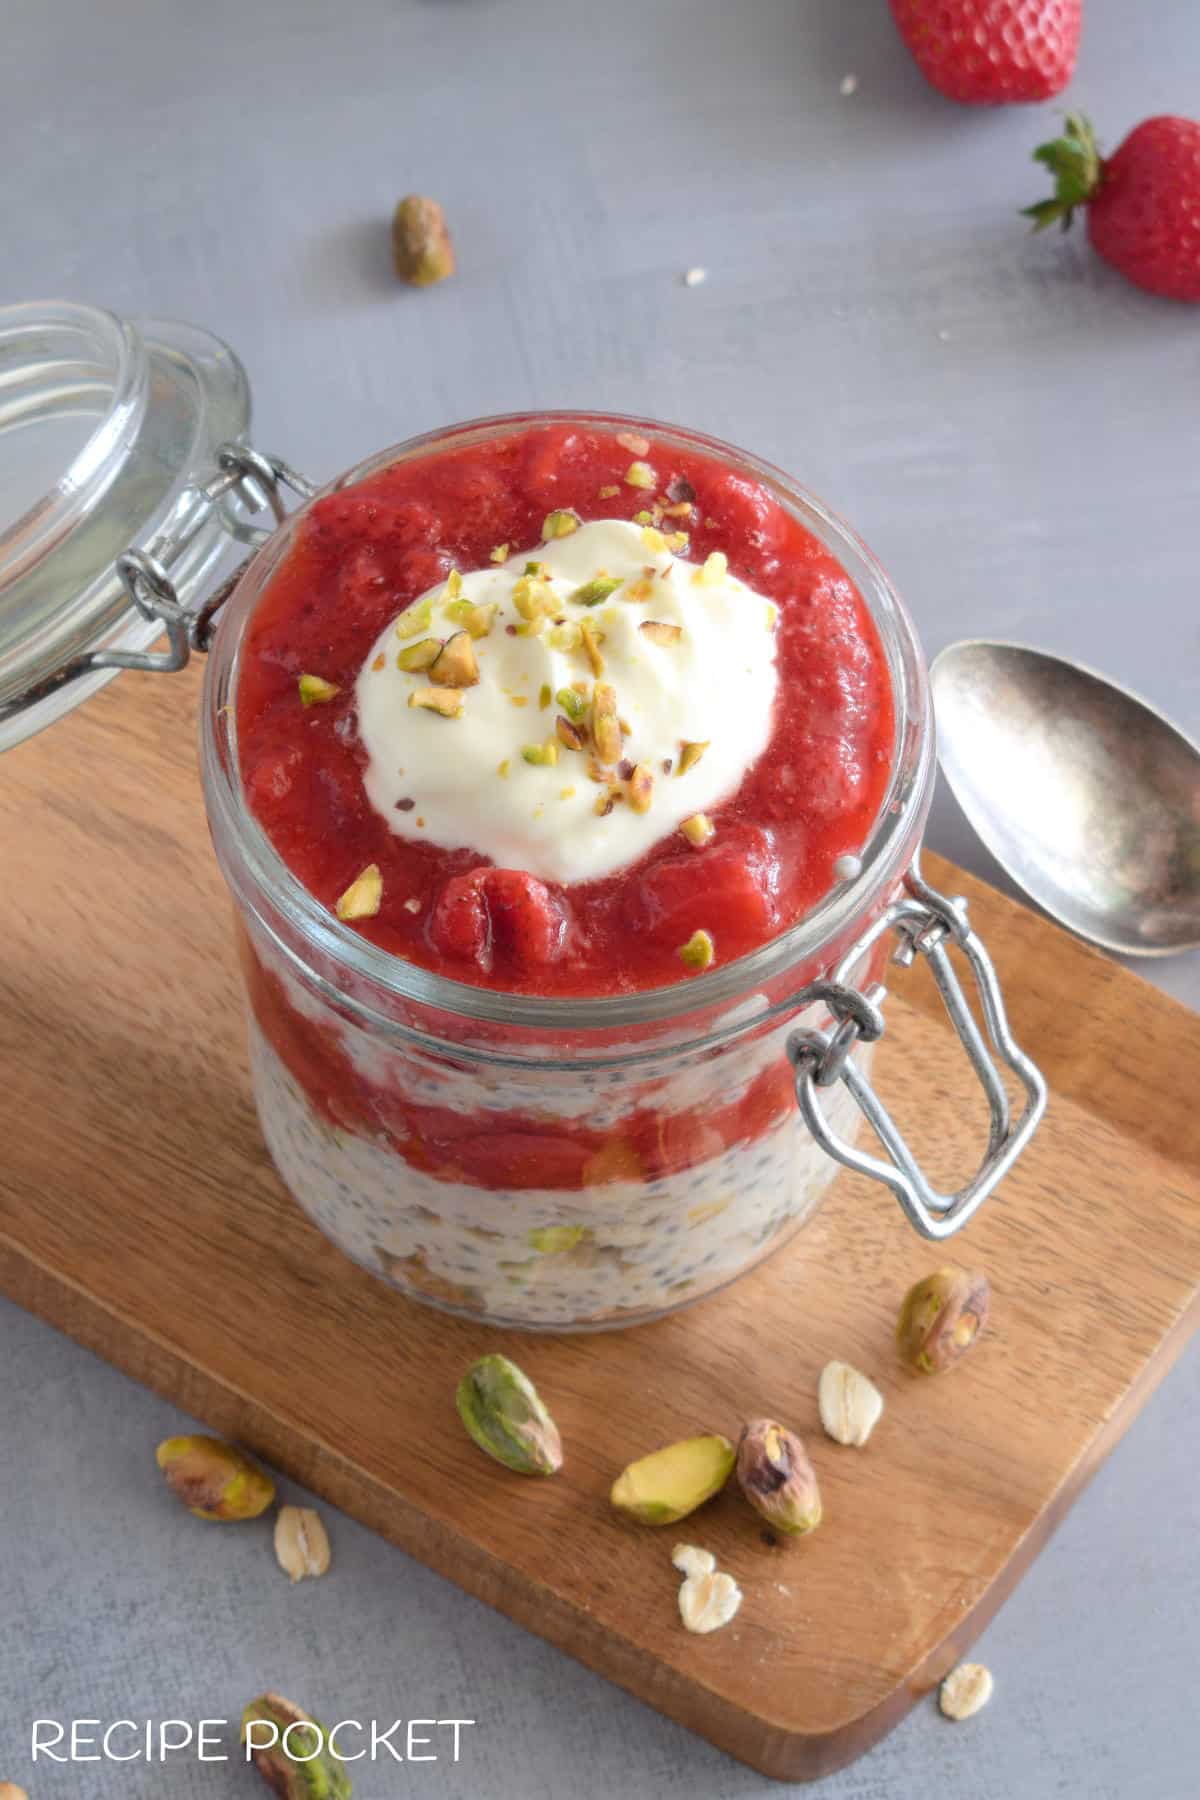 Images showing a strawberry sauce and yogurt topping on overnight oats in a jar.